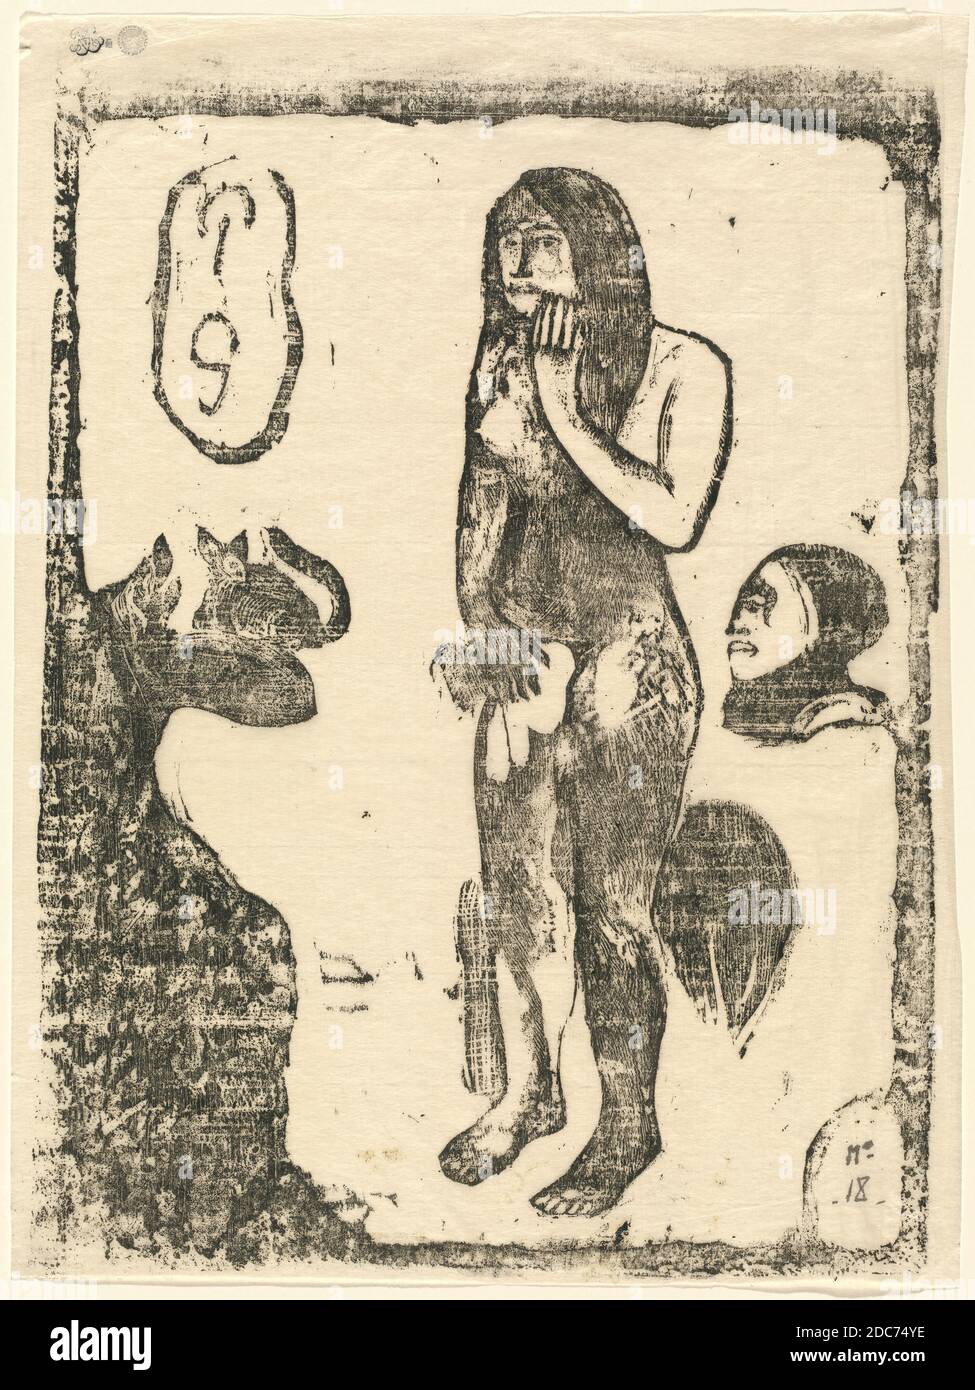 Paul Gauguin, (artist), French, 1848 - 1903, Eve, in or after 1895, woodcut on japan paper Stock Photo